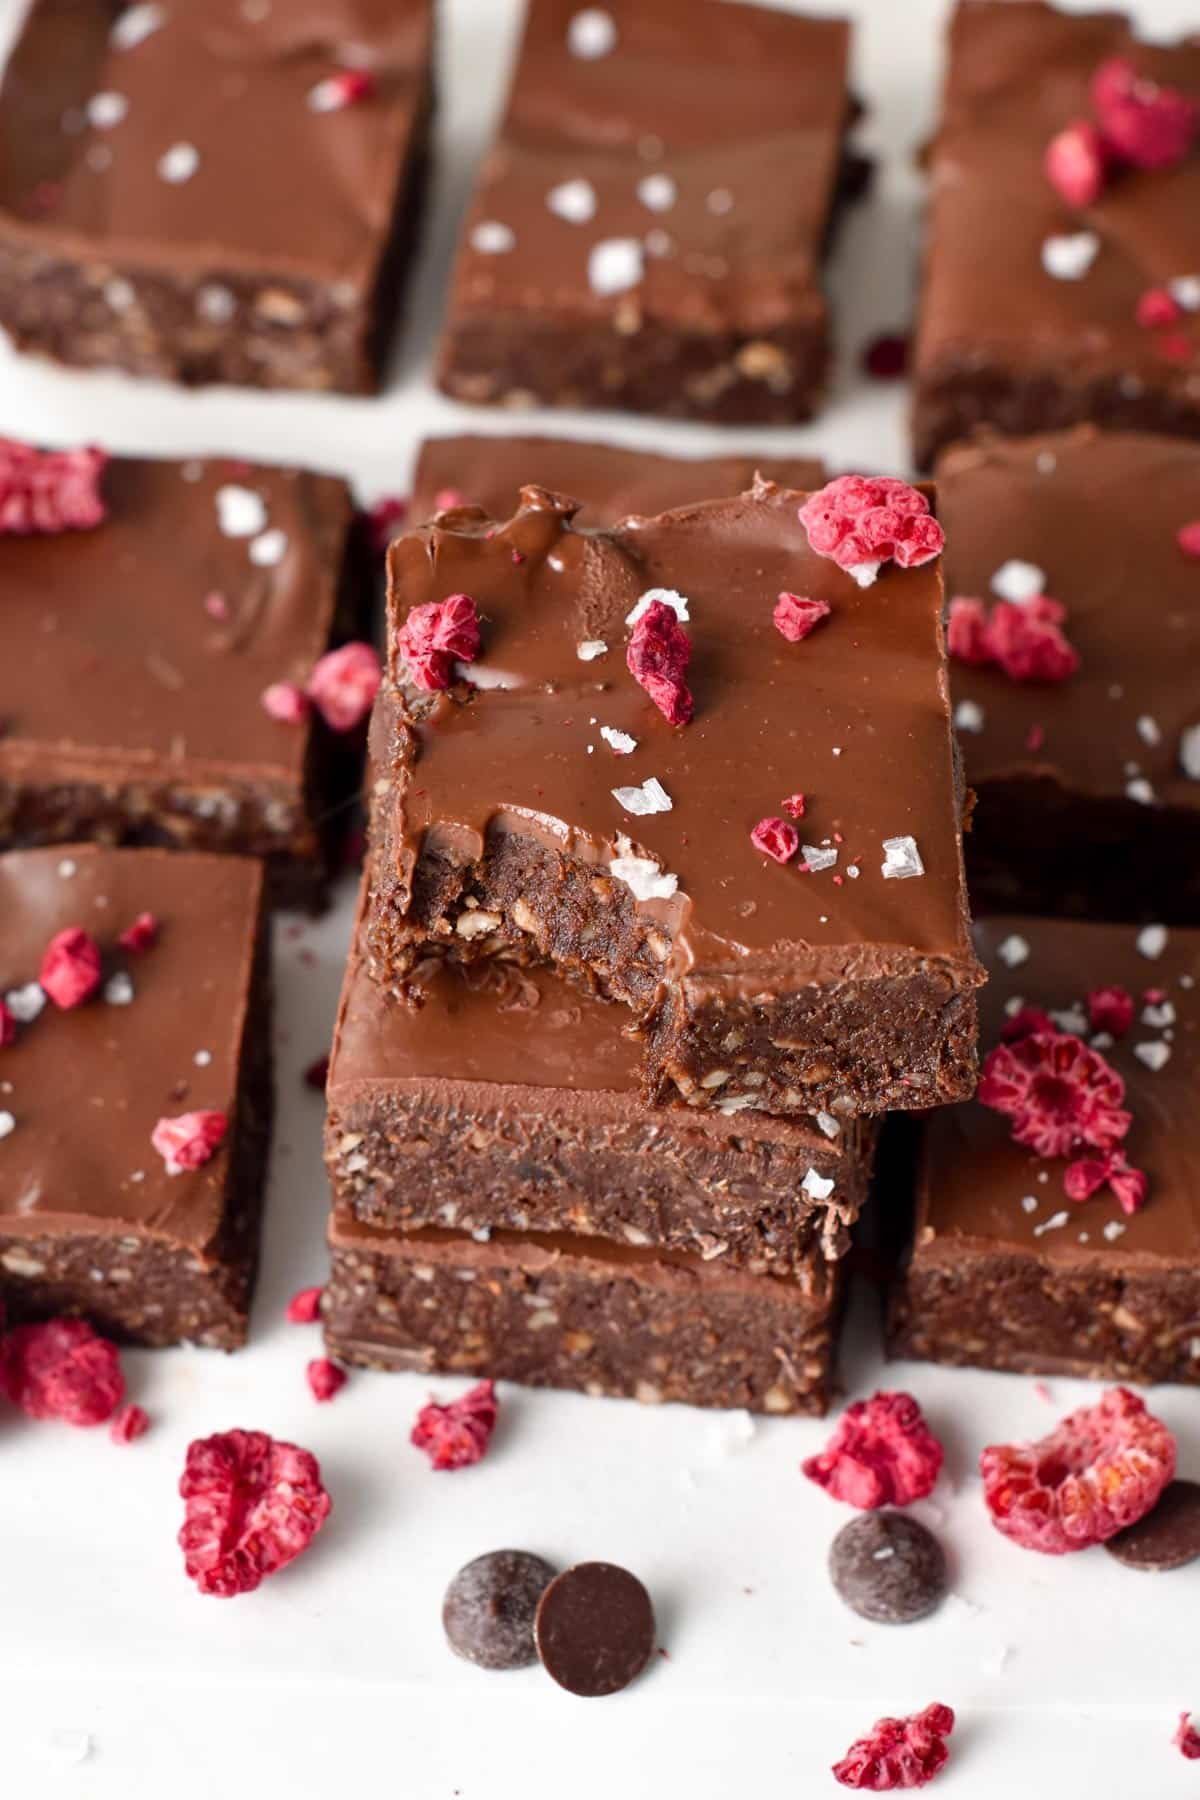 These No Bake Brownies are easy healthy fudgy brownies made in less than 20 minutes without an oven. Plus, this healthy dessert recipe is also naturally refined sugar-free, dairy-free, and vegan.